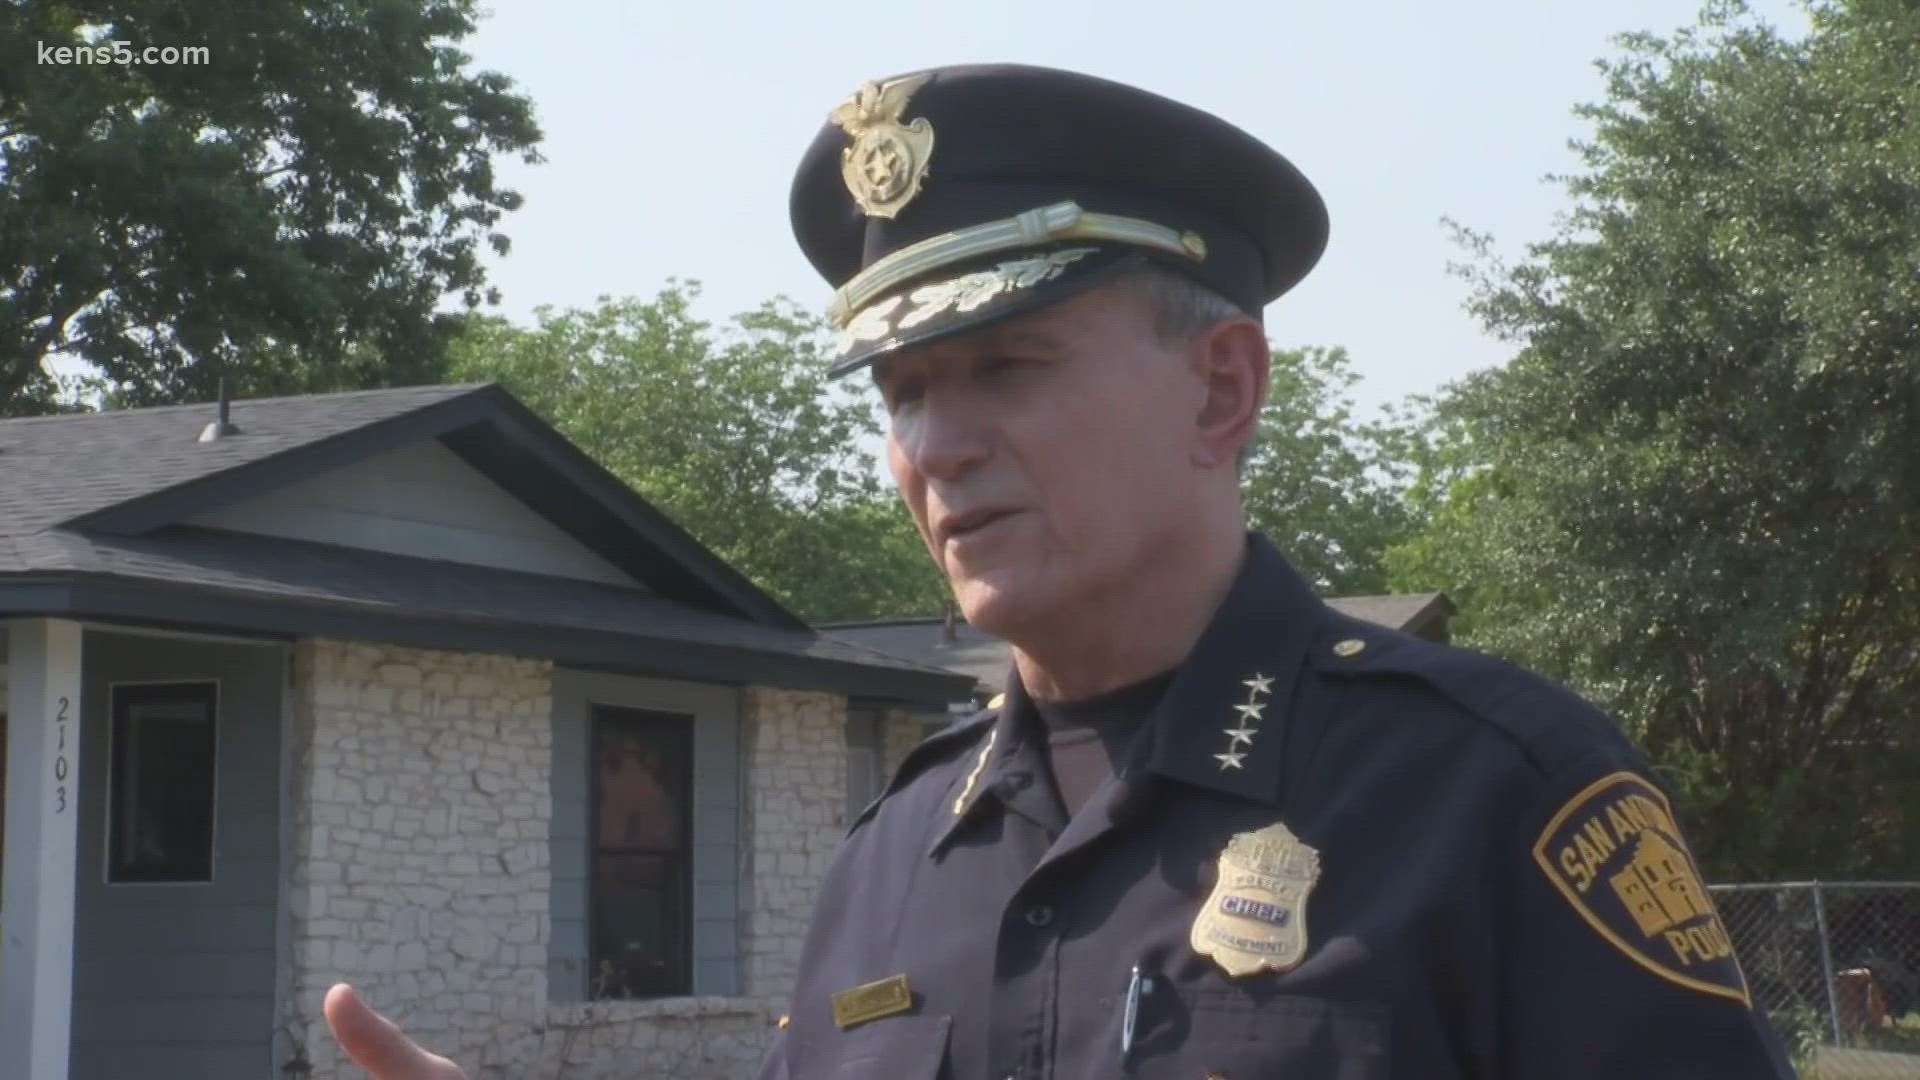 "There's too much of it going on, where people are settling these disagreements with firearms," SAPD Chief William McManus said.